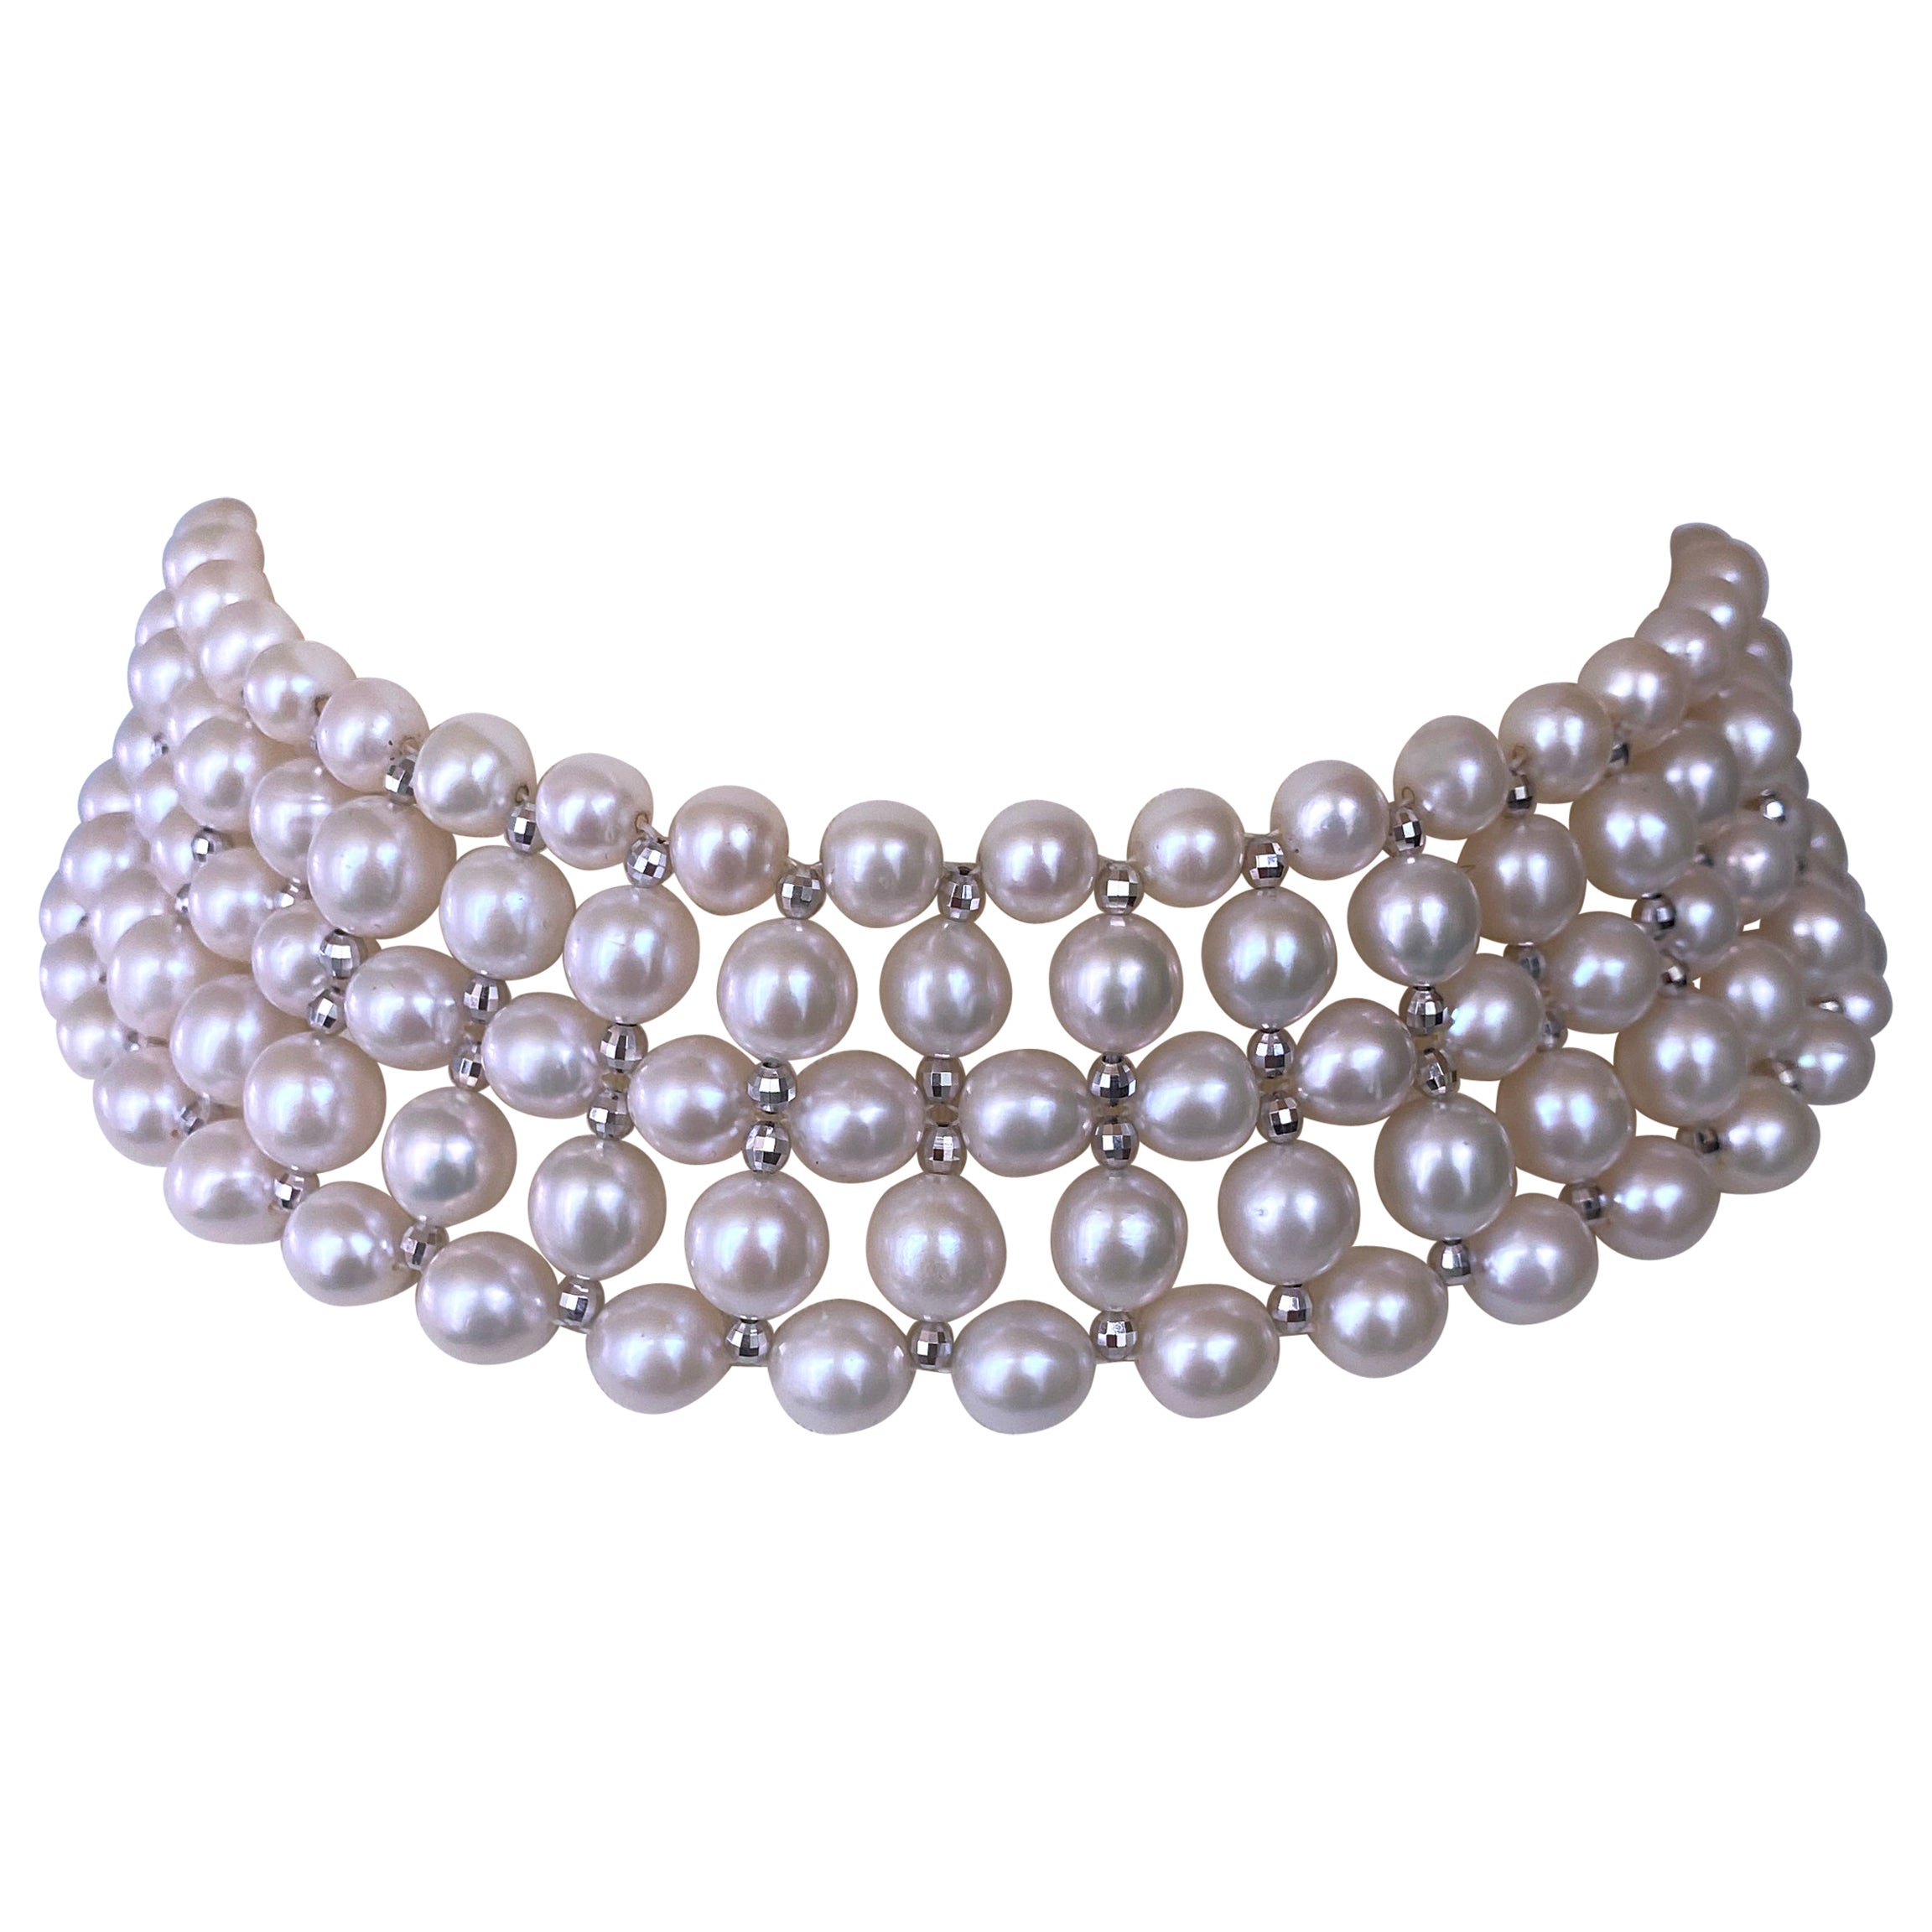 Marina J. Woven Pearl Choker with Silver Rhodium Plated Disco Accents For Sale